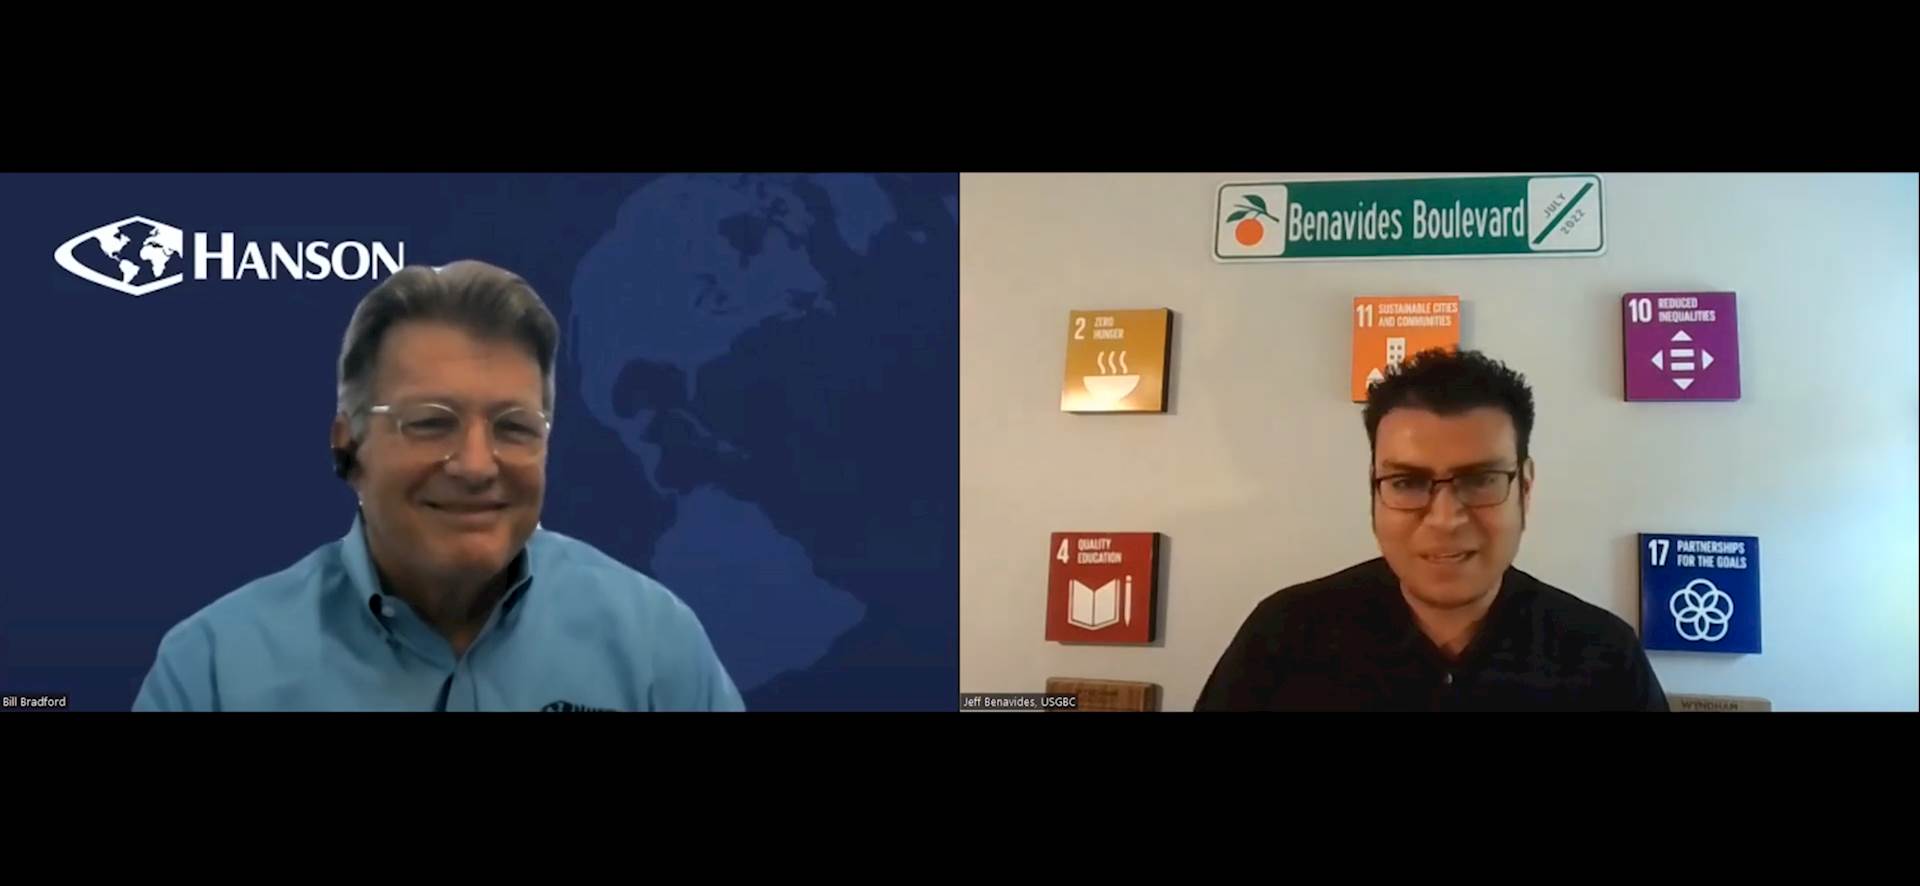 Screenshot from Discussions With Energy Leaders shows Bill Bradford and Jeff Benavides smiling